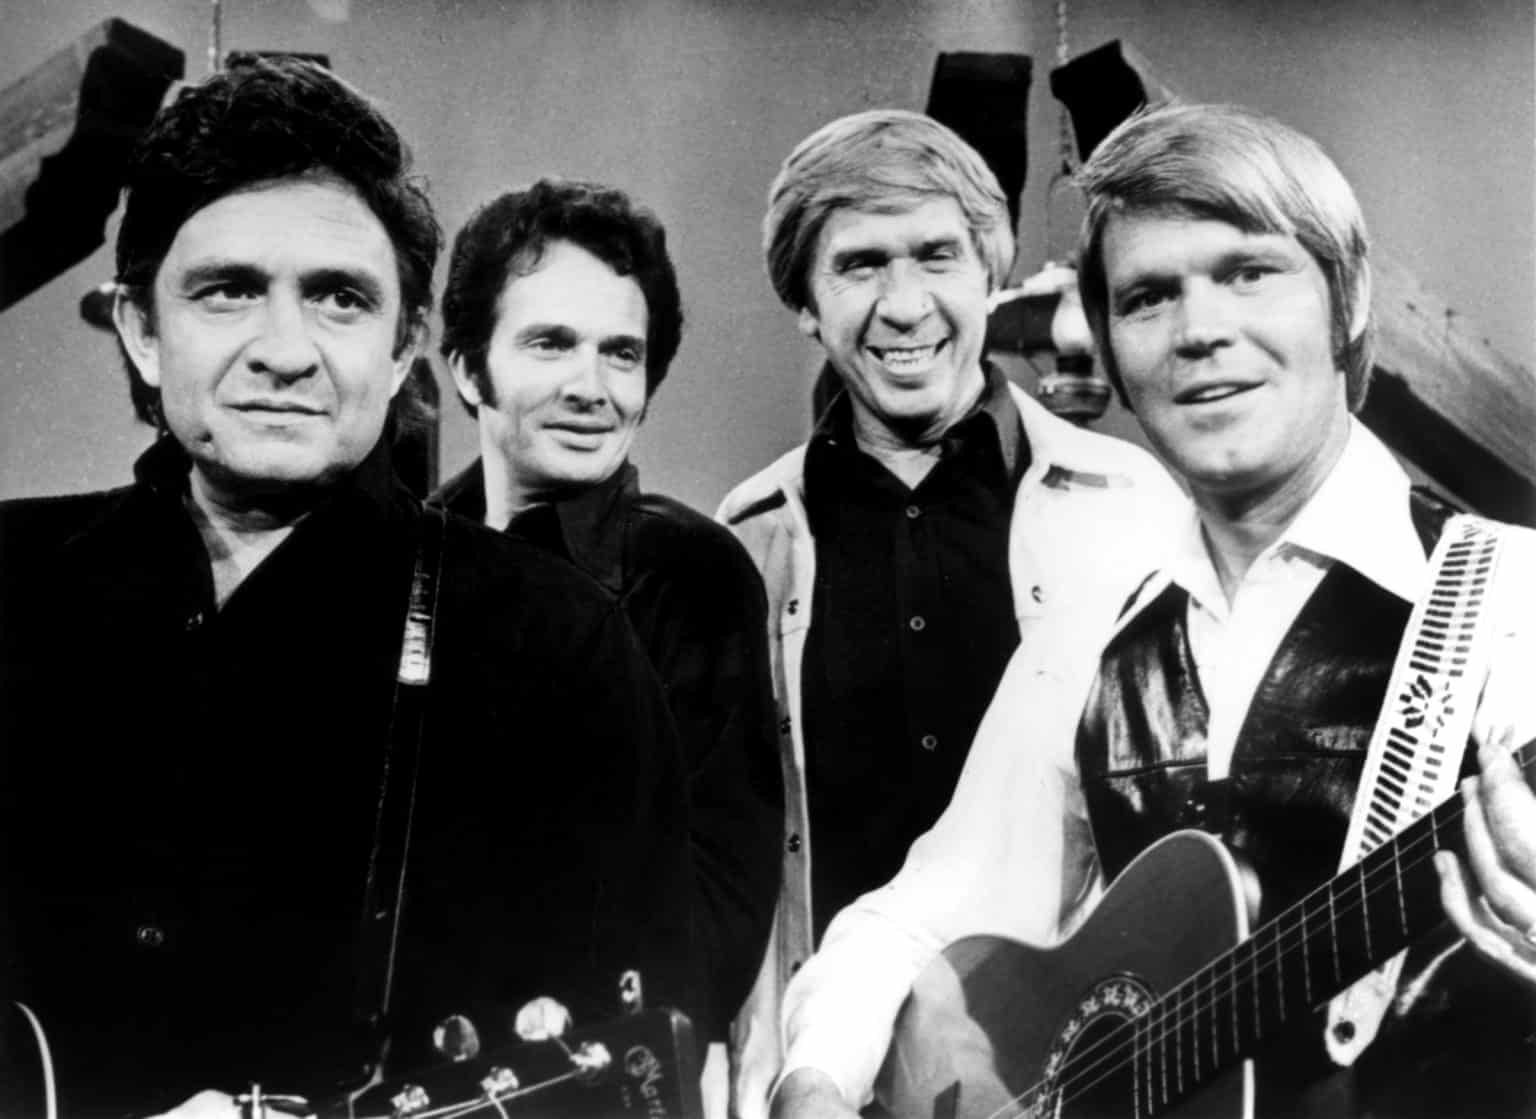 Buck Owens From 'Hee Haw' Crossed Paths With Merle Haggard Before Dying ...